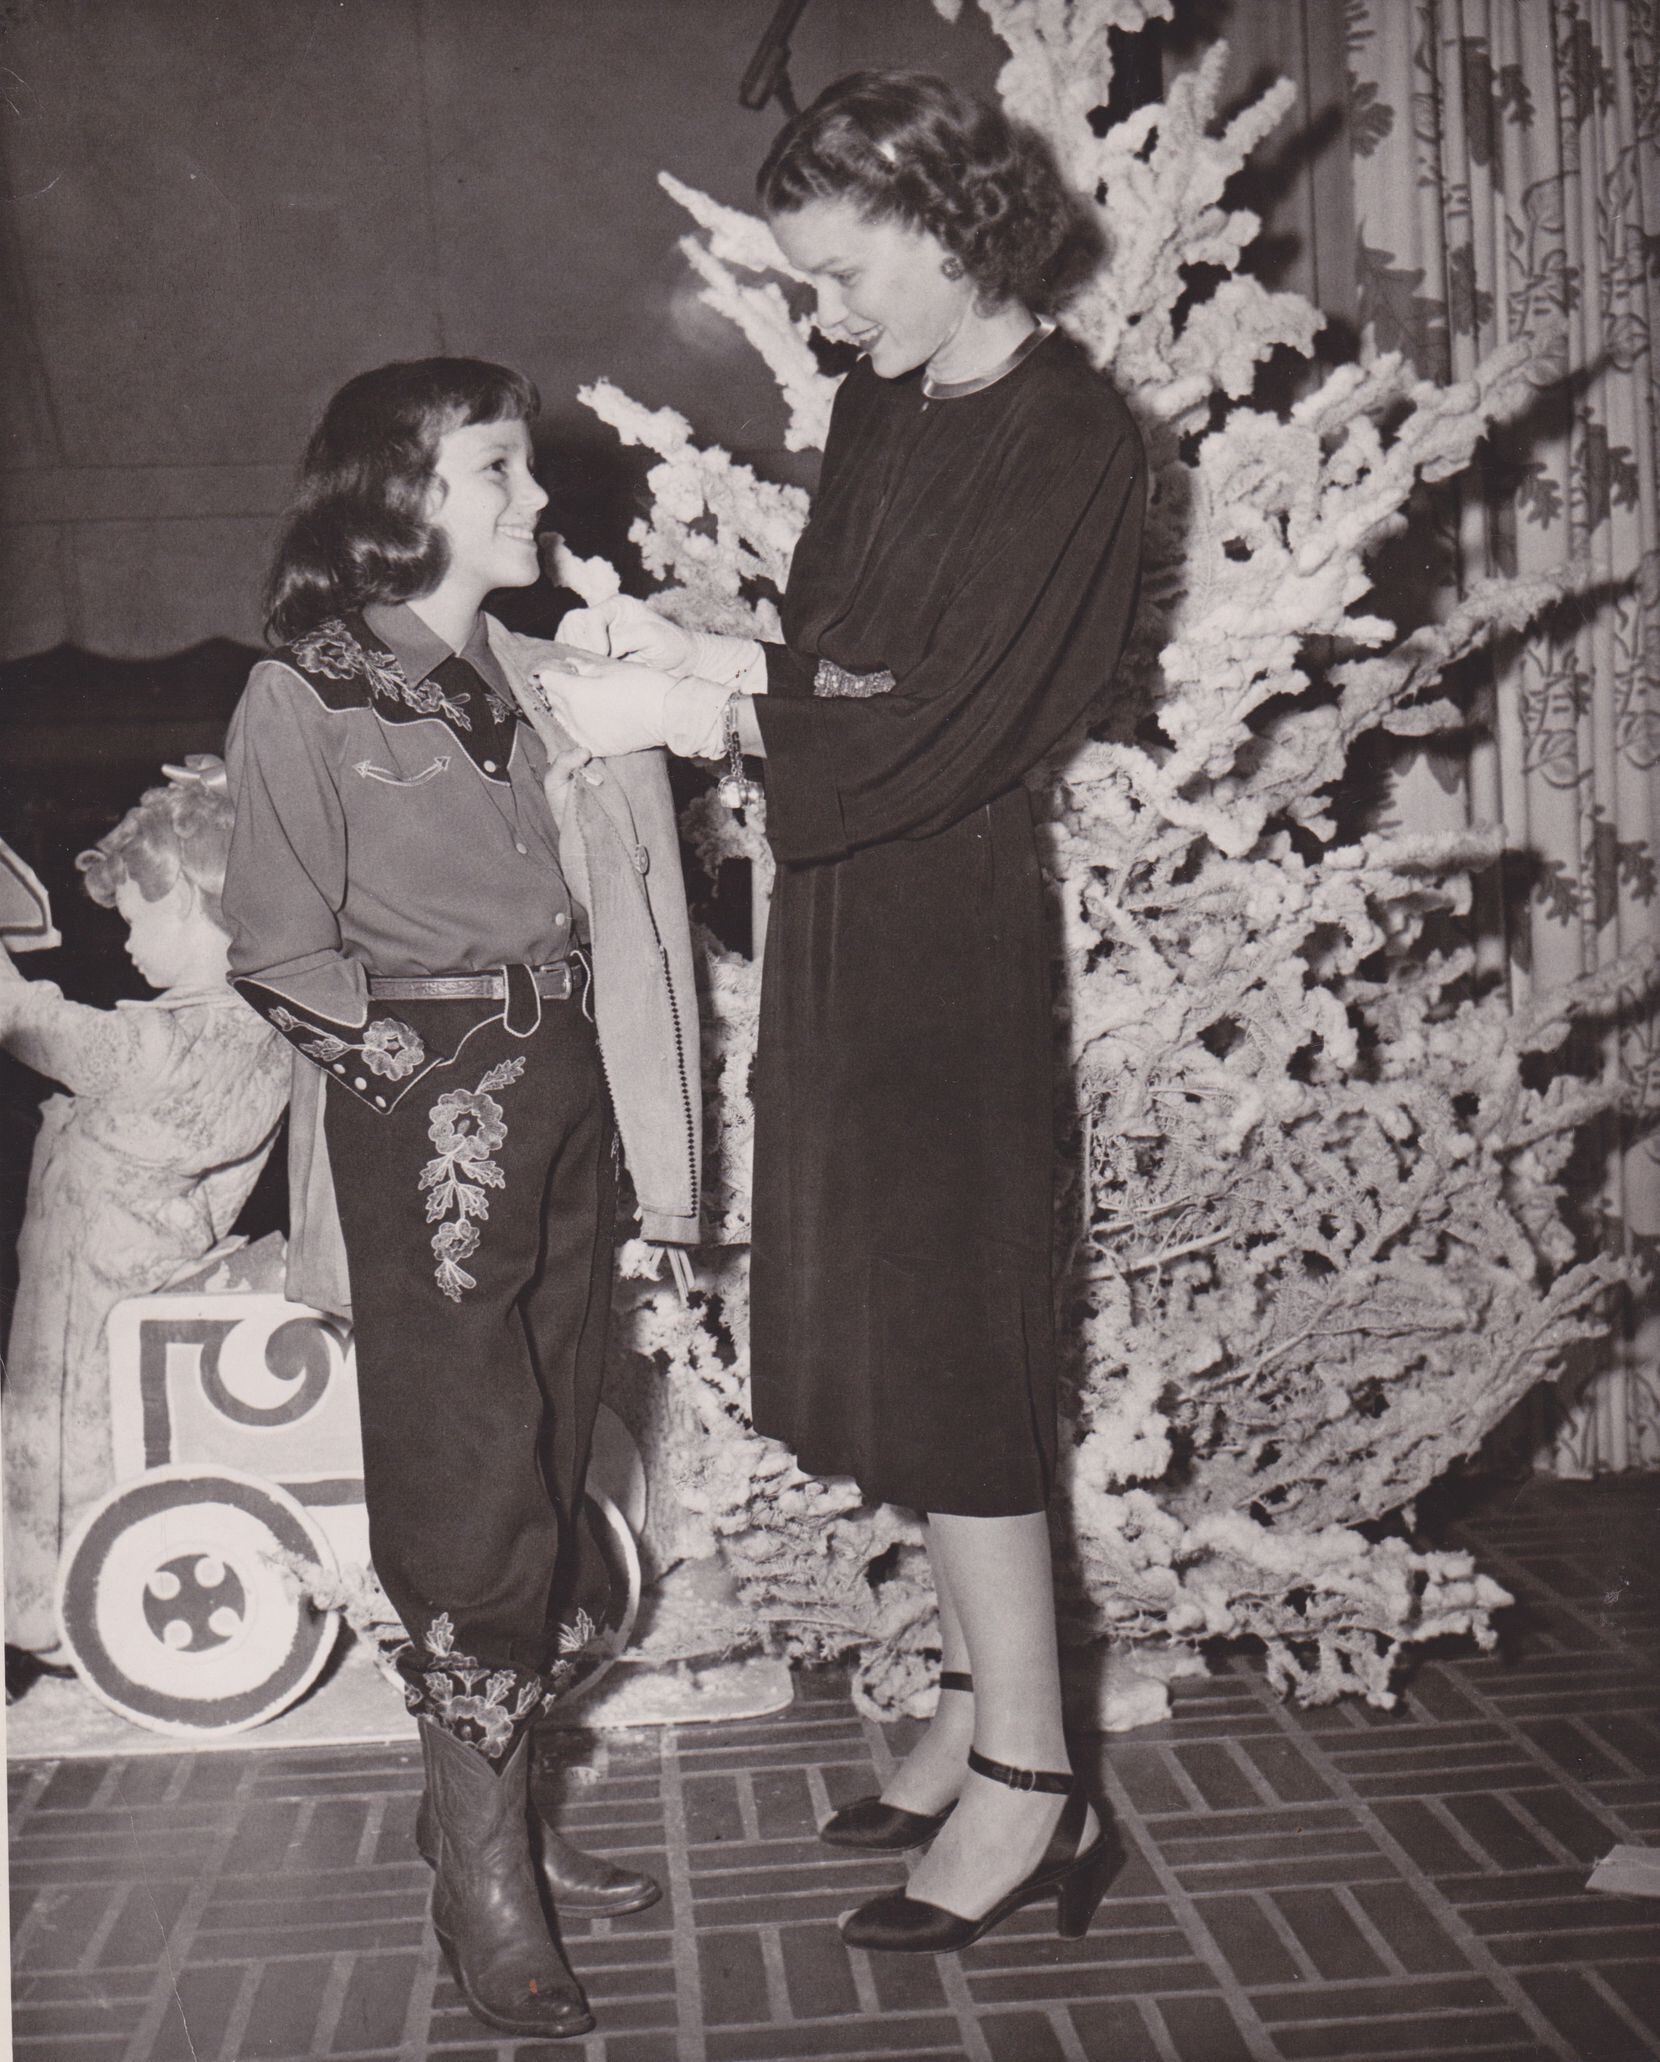 Jerrie with her mother, Mary "Billie" Cantrell Marcus, in the 1940s.